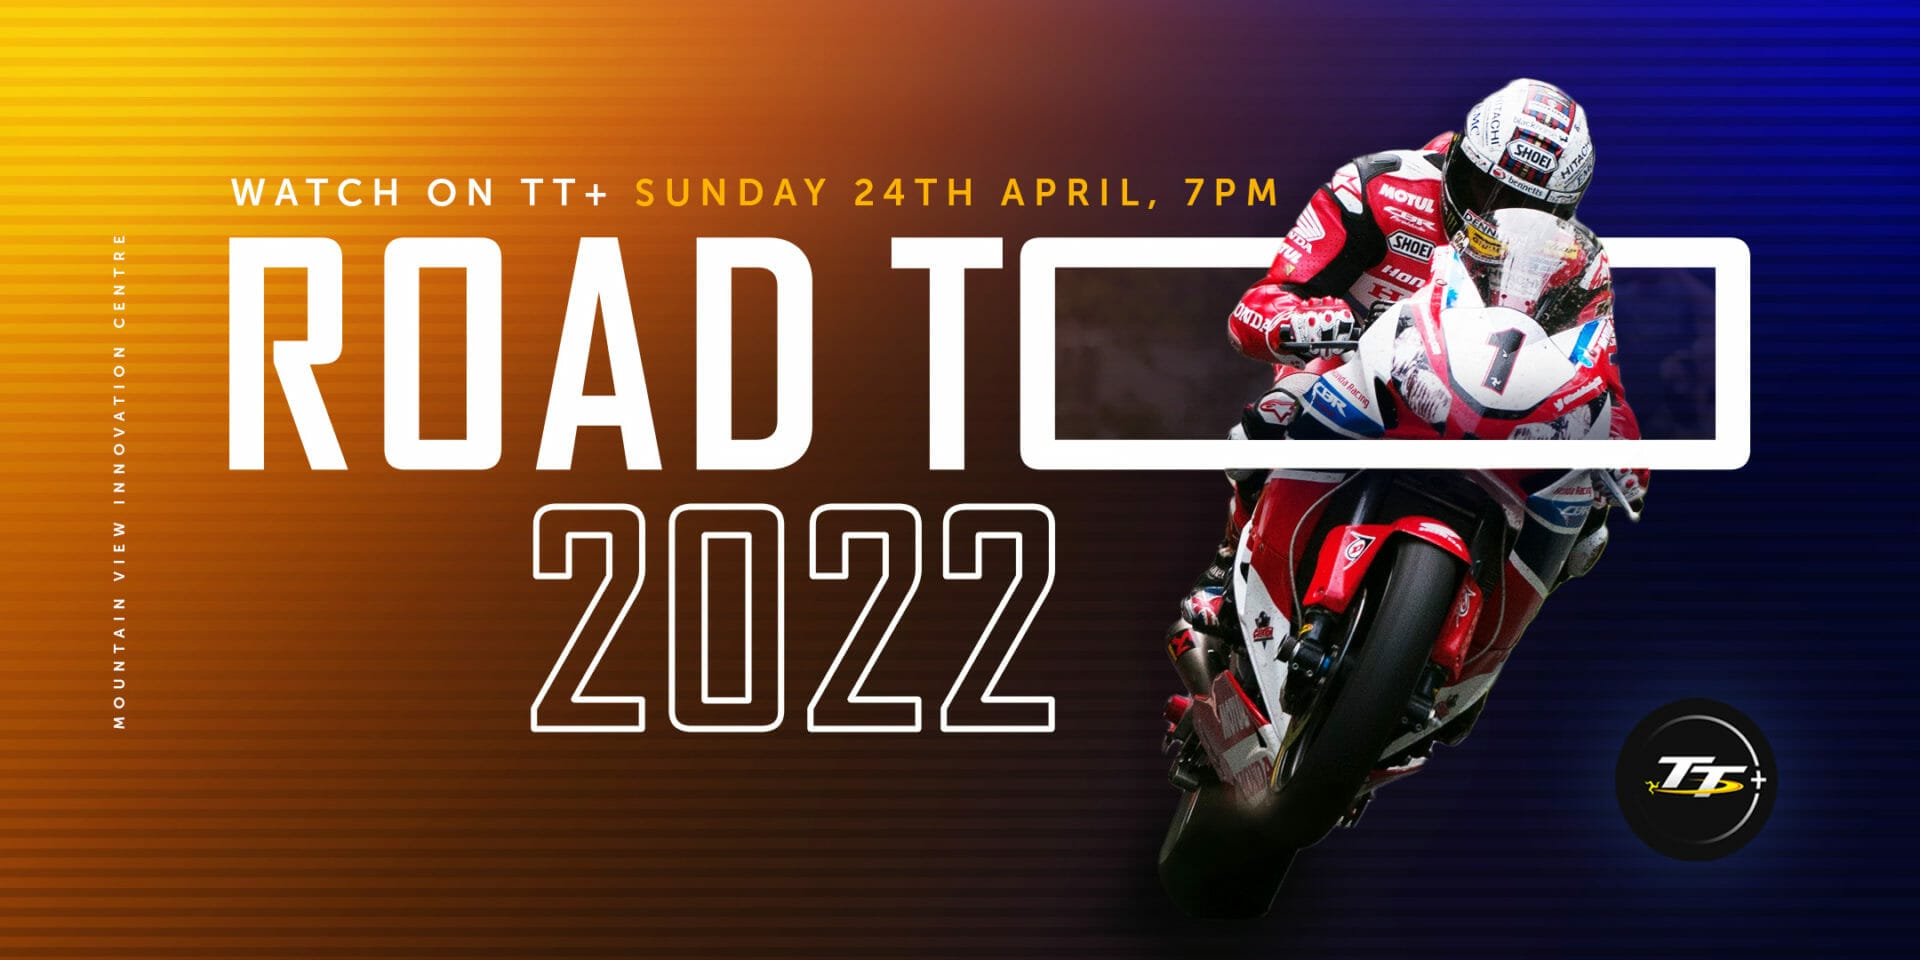 Isle of Man TT 2022 Preview Show „Road to 2022“ - MOTORCYCLES.NEWS